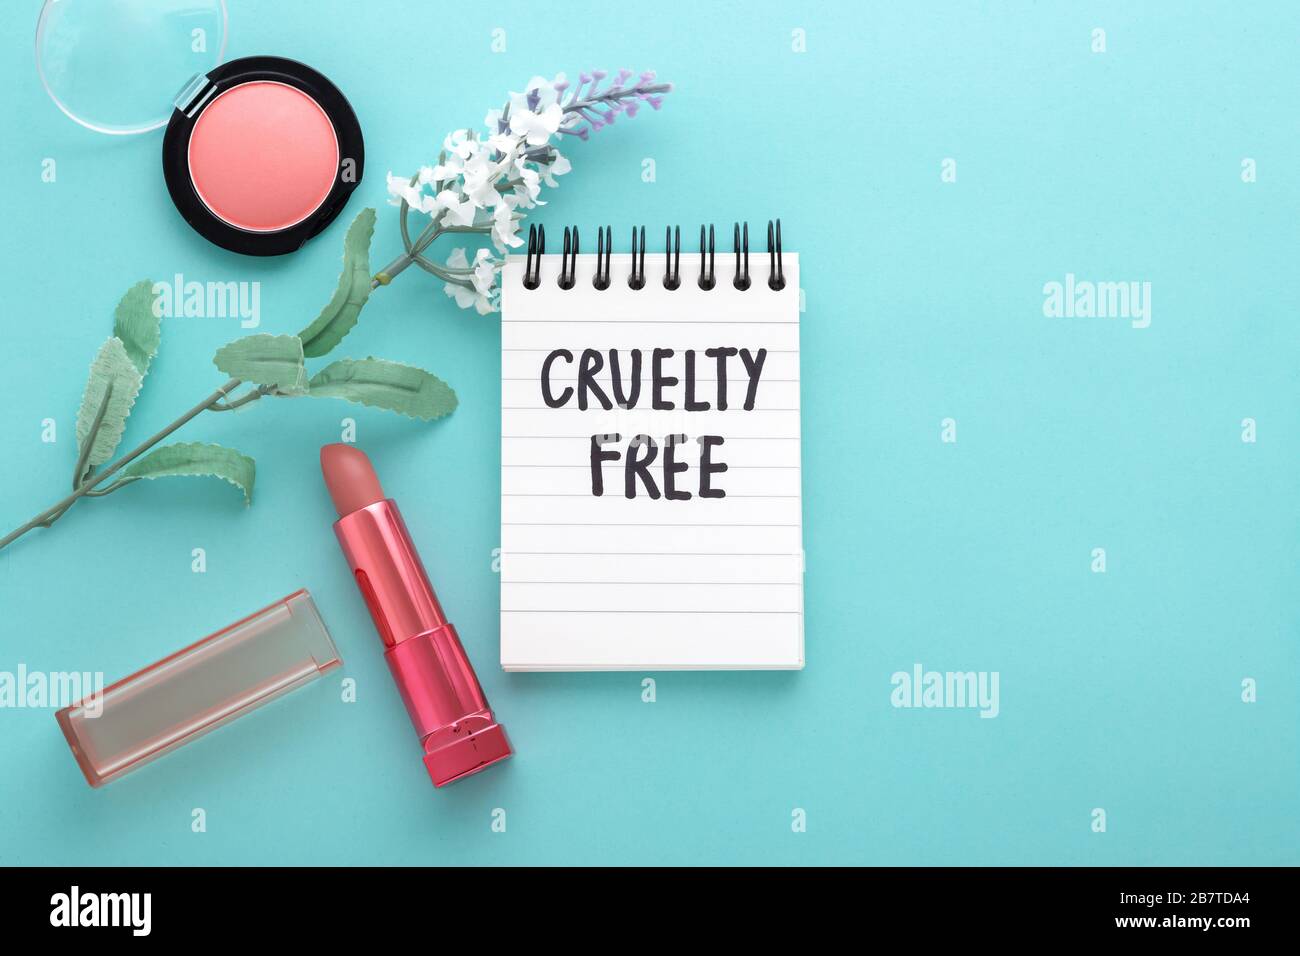 Cruelty free concept with lipstick, blush, and flowers on blue background, with space flat lay Stock Photo